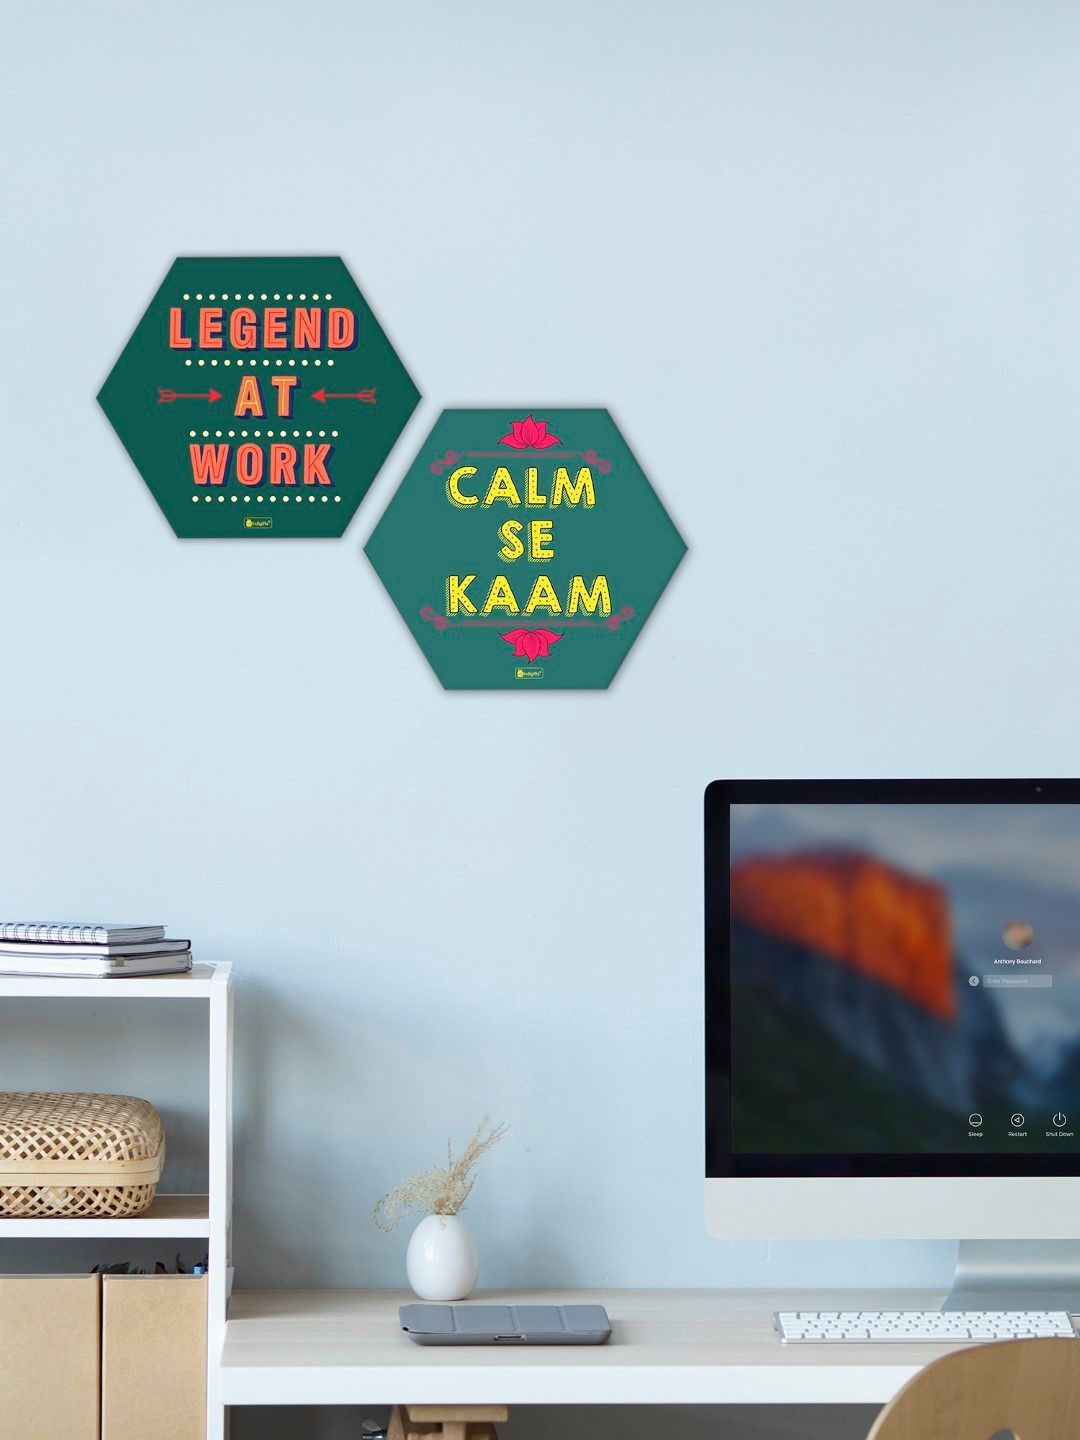 Indigifts Hexagon Poster Frame Set Legend at Work Quotes Printed Poster Frame, Room D?cor, Room Decoration Items, Home Decorative Gift Item, Decor Items for Living Room, Bedroom, Kitchen Corner